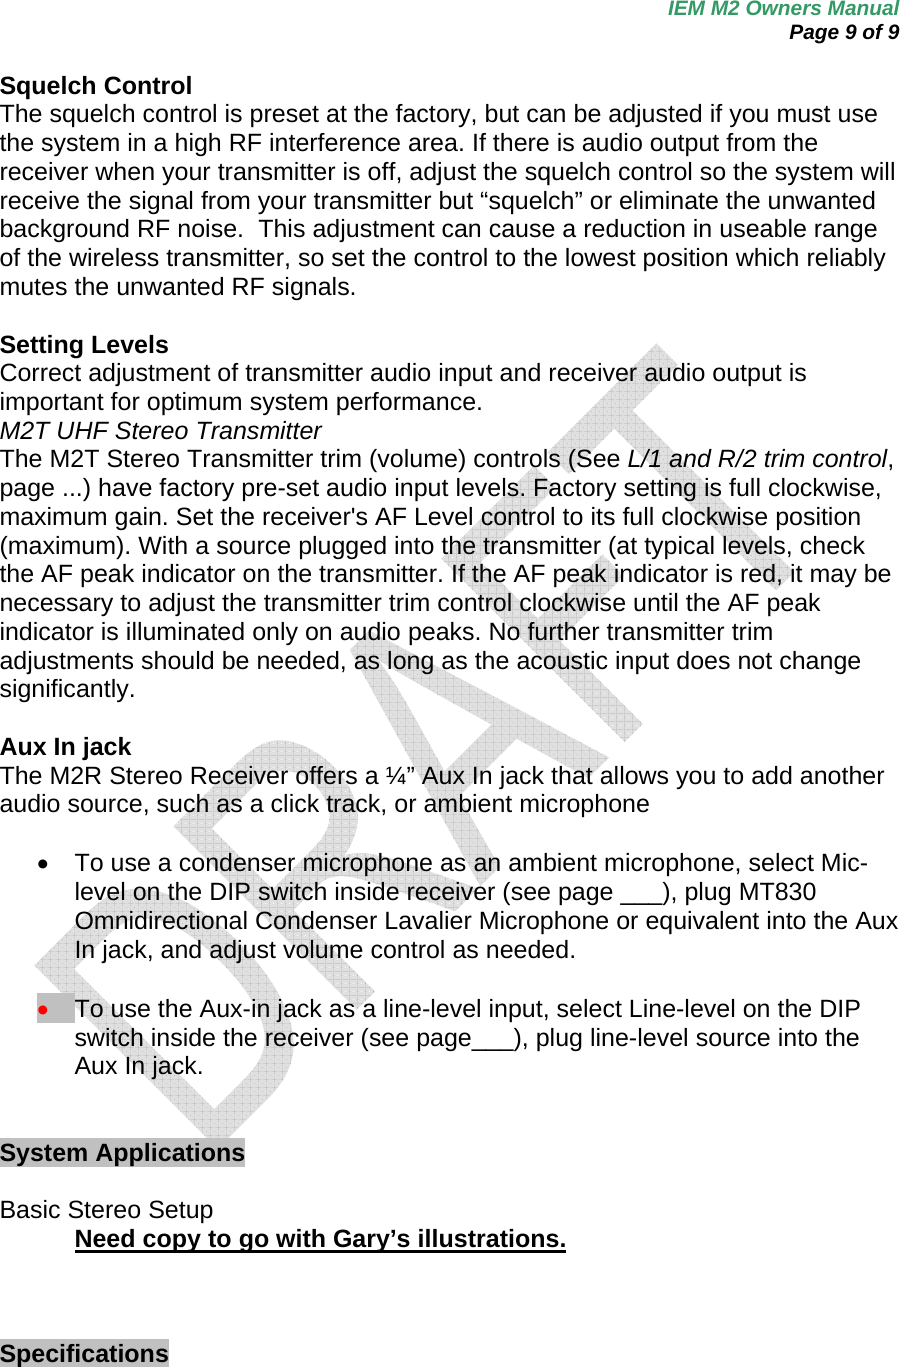 IEM M2 Owners Manual  Page 9 of 9  Squelch Control The squelch control is preset at the factory, but can be adjusted if you must use the system in a high RF interference area. If there is audio output from the receiver when your transmitter is off, adjust the squelch control so the system will receive the signal from your transmitter but “squelch” or eliminate the unwanted background RF noise.  This adjustment can cause a reduction in useable range of the wireless transmitter, so set the control to the lowest position which reliably mutes the unwanted RF signals.  Setting Levels Correct adjustment of transmitter audio input and receiver audio output is important for optimum system performance. M2T UHF Stereo Transmitter The M2T Stereo Transmitter trim (volume) controls (See L/1 and R/2 trim control, page ...) have factory pre-set audio input levels. Factory setting is full clockwise, maximum gain. Set the receiver&apos;s AF Level control to its full clockwise position (maximum). With a source plugged into the transmitter (at typical levels, check the AF peak indicator on the transmitter. If the AF peak indicator is red, it may be necessary to adjust the transmitter trim control clockwise until the AF peak indicator is illuminated only on audio peaks. No further transmitter trim adjustments should be needed, as long as the acoustic input does not change significantly.  Aux In jack The M2R Stereo Receiver offers a ¼” Aux In jack that allows you to add another audio source, such as a click track, or ambient microphone     •  To use a condenser microphone as an ambient microphone, select Mic-level on the DIP switch inside receiver (see page ___), plug MT830 Omnidirectional Condenser Lavalier Microphone or equivalent into the Aux In jack, and adjust volume control as needed.  • To use the Aux-in jack as a line-level input, select Line-level on the DIP switch inside the receiver (see page___), plug line-level source into the Aux In jack.    System Applications   Basic Stereo Setup Need copy to go with Gary’s illustrations.     Specifications 